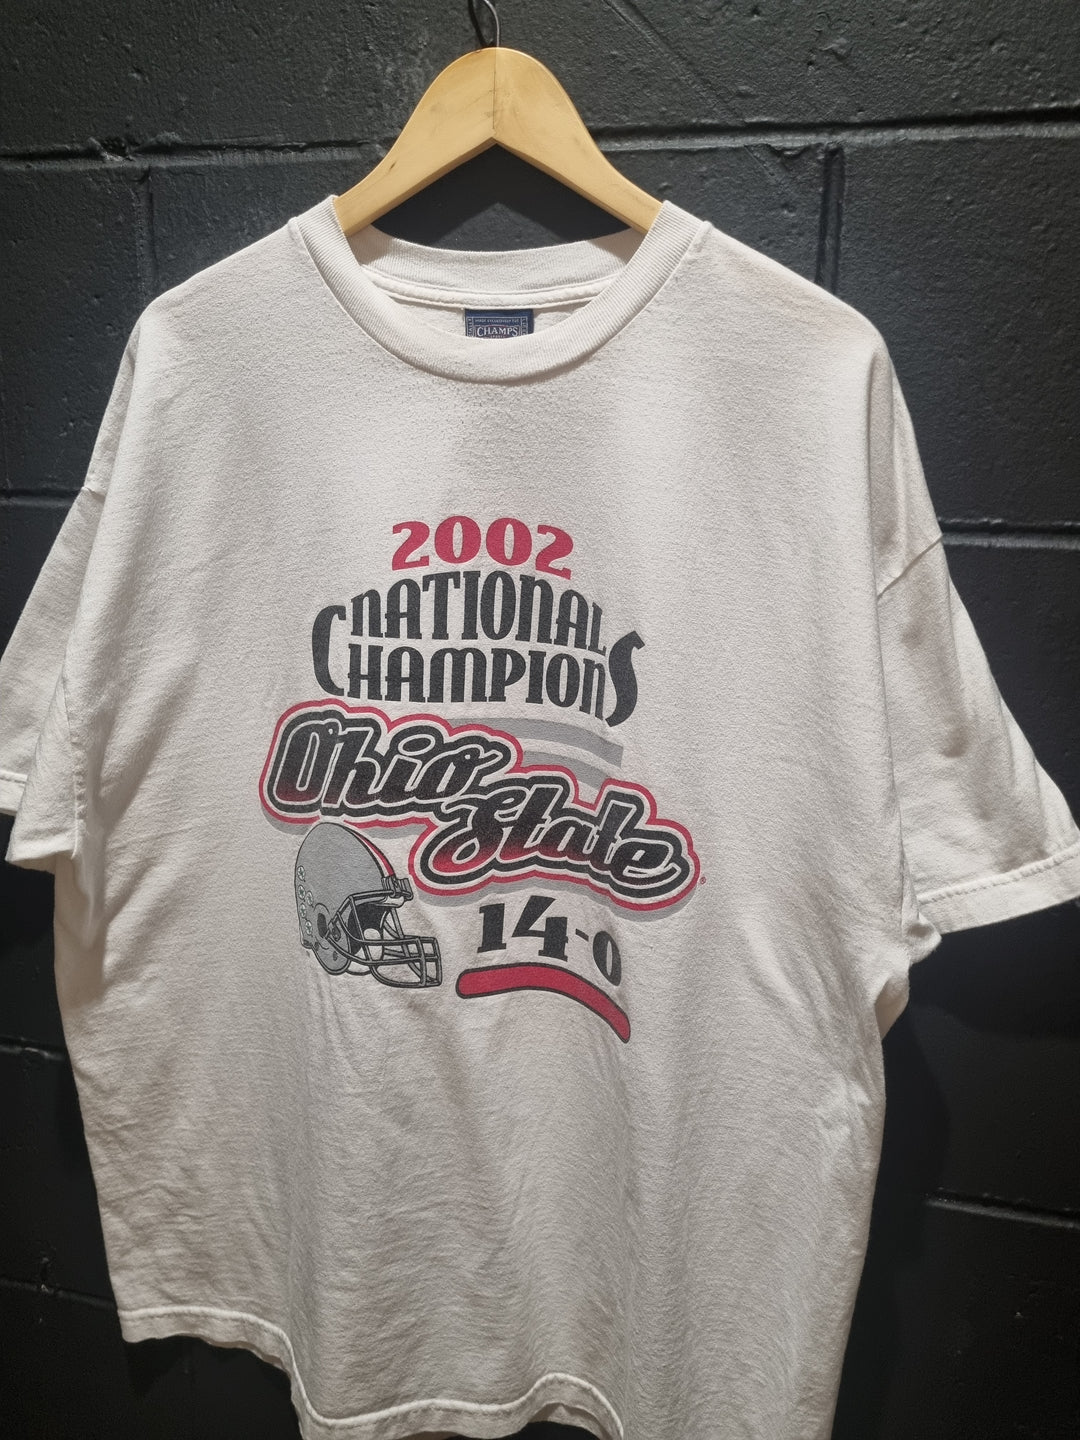 Ohio State National Champions 2002 Licensed Champs XL